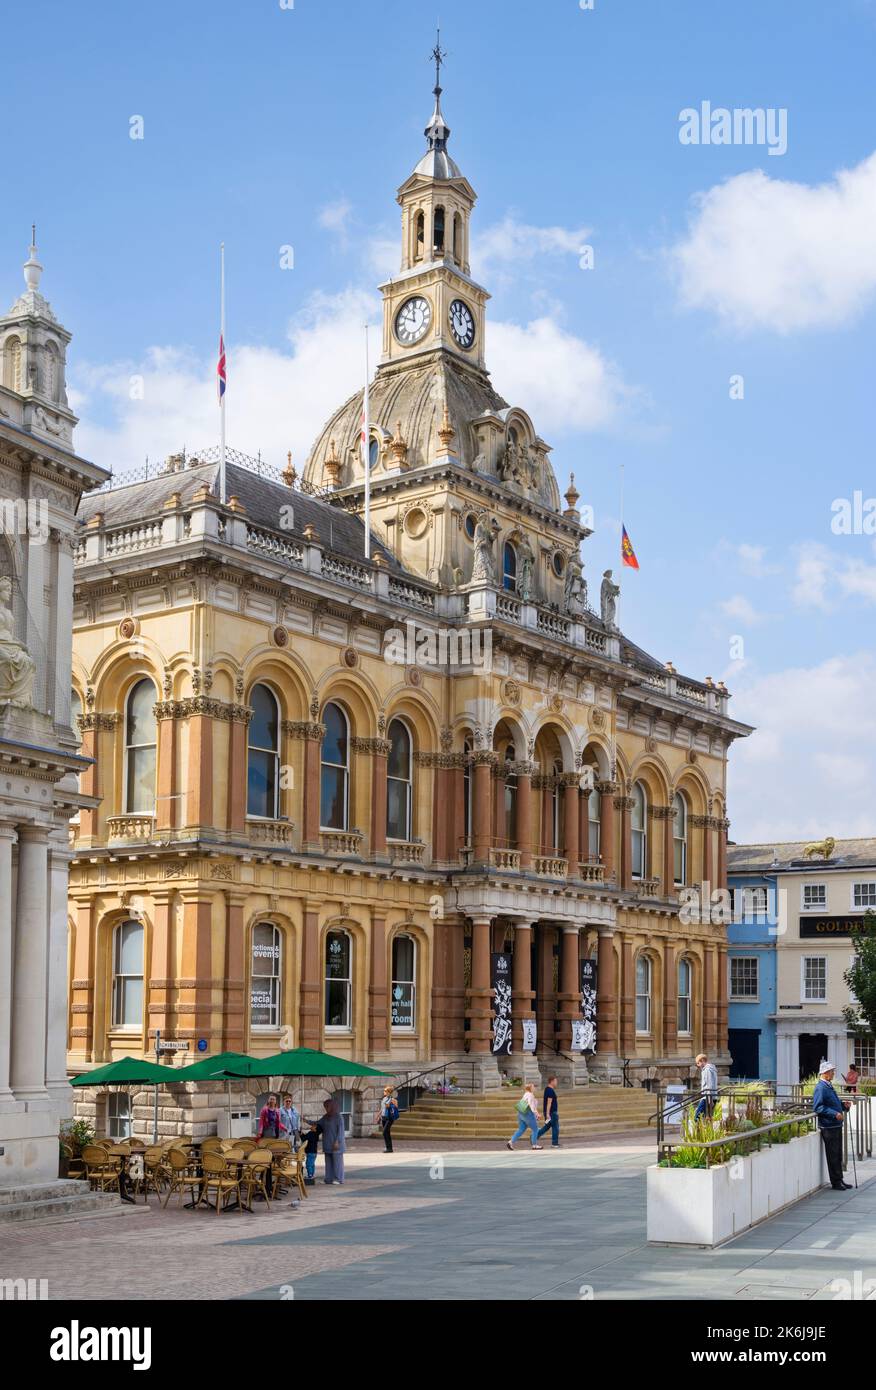 Ipswich Town Hall and Corn Exchange Ipswich Suffolk Angleterre GB Europe Banque D'Images